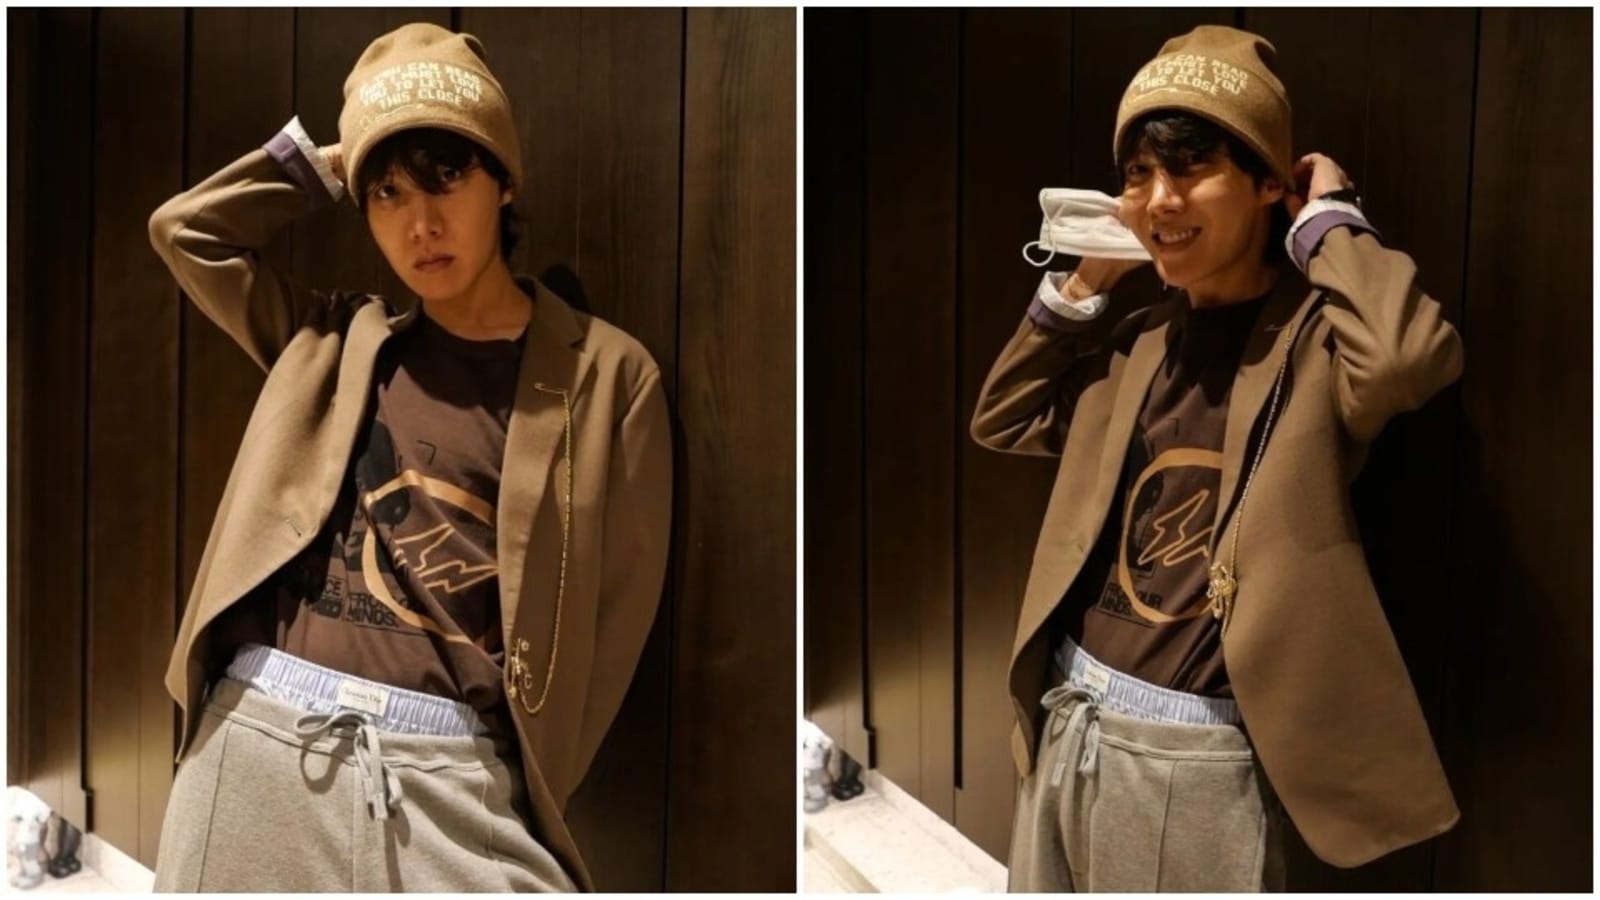 BTS's J-Hope Shows His Personal Style Through His Outfits of the